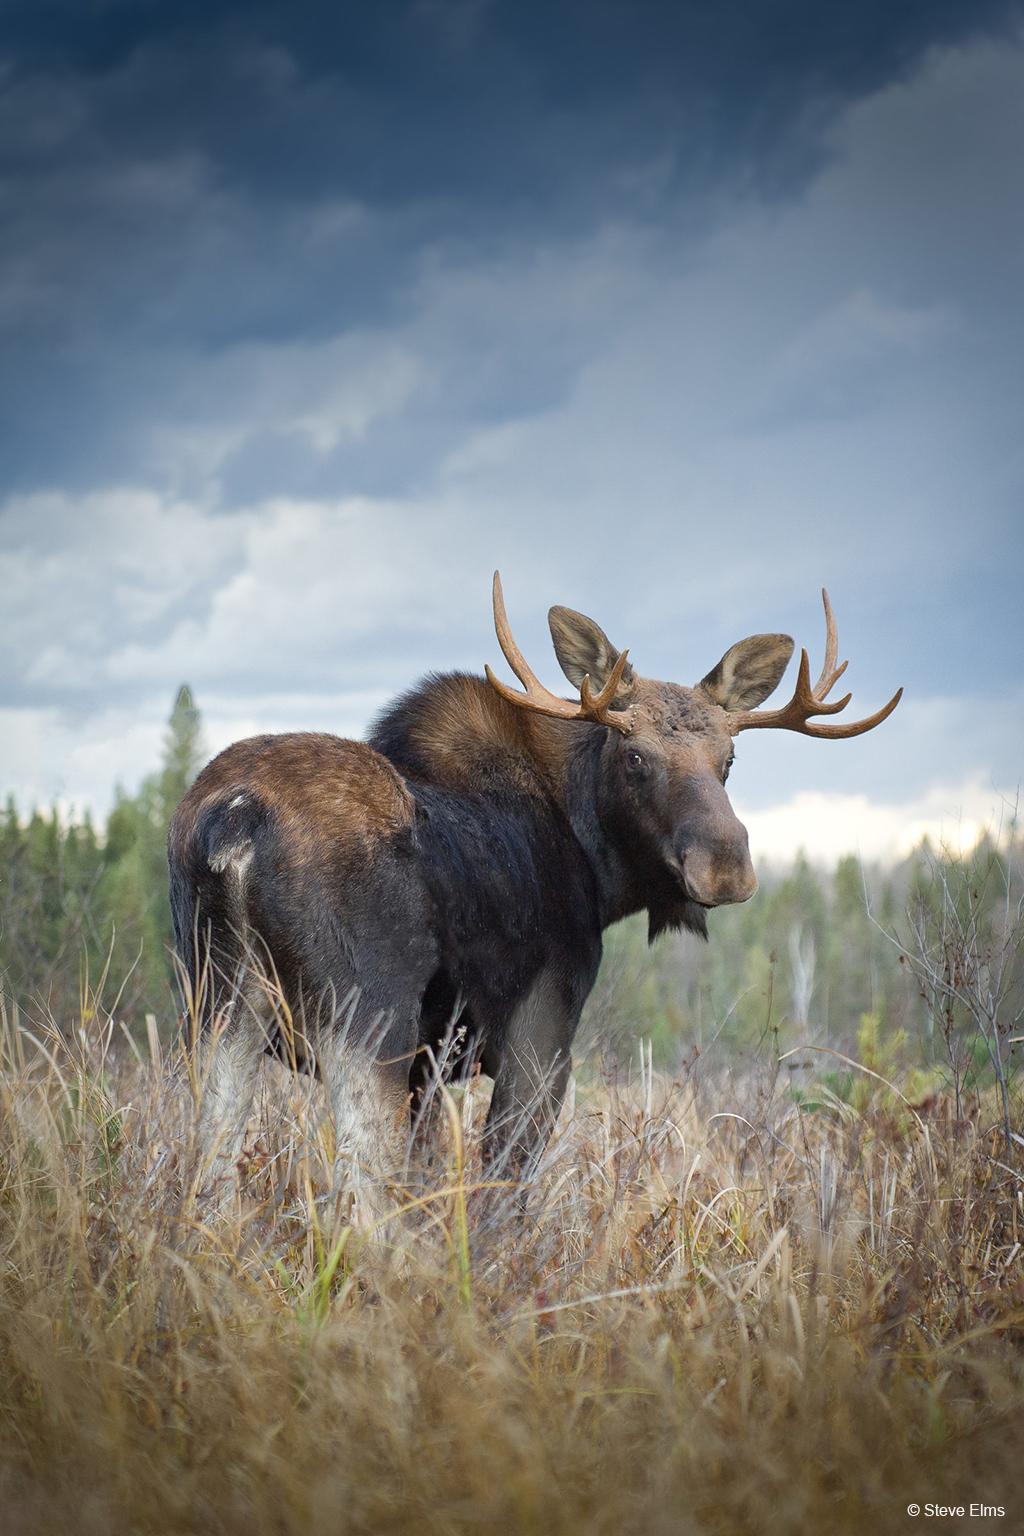 Today’s Photo Of The Day is “Young Bull Moose” by Steve Elms. Location: Algonquin Provincial Park, Ontario, Canada.